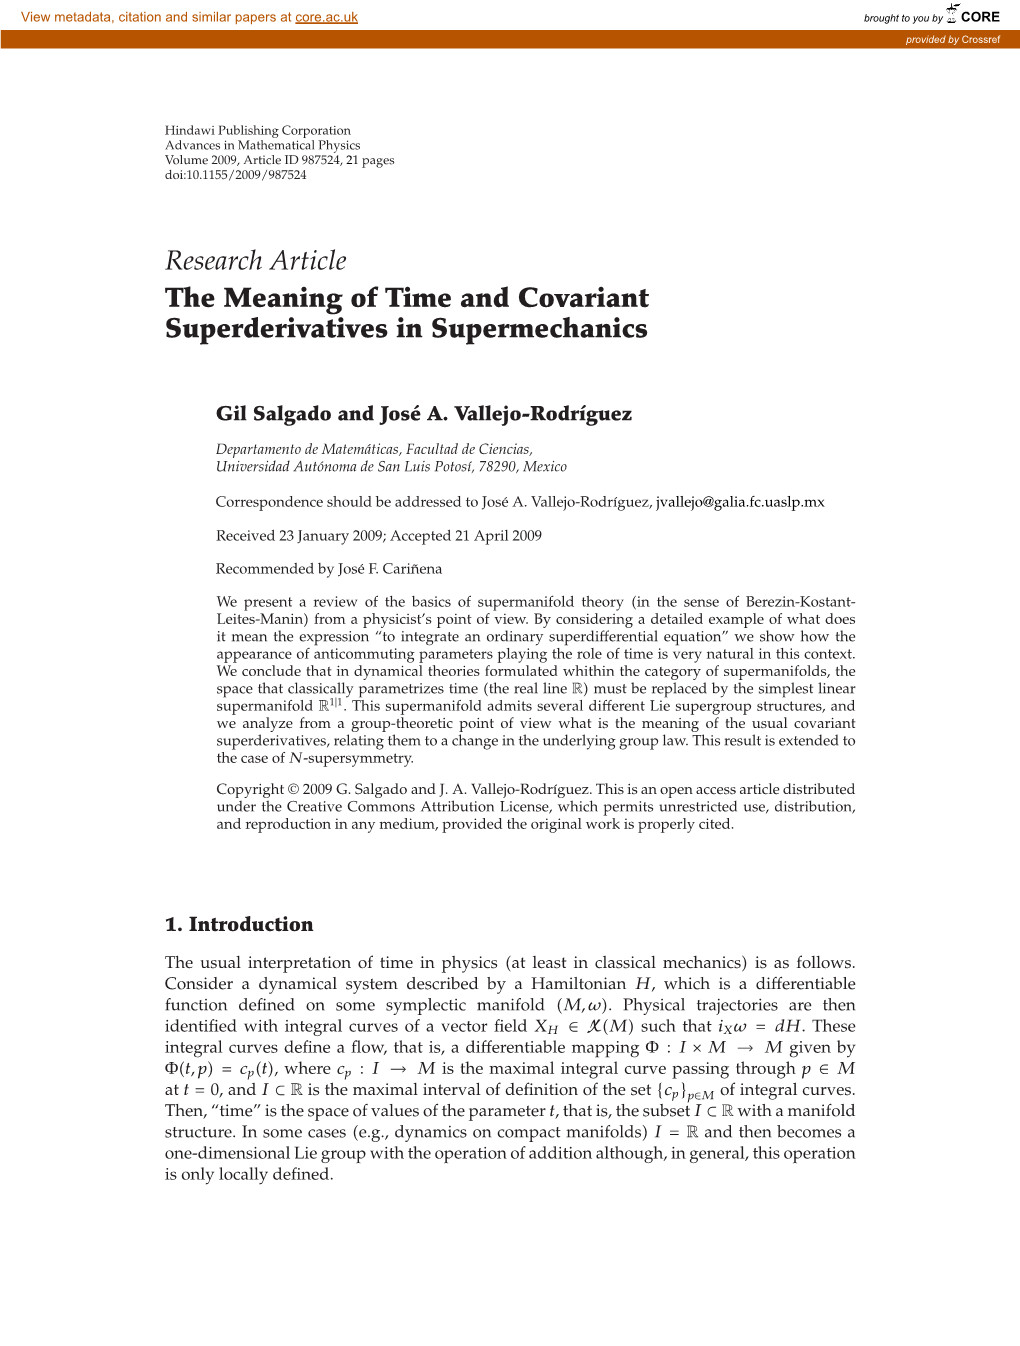 Research Article the Meaning of Time and Covariant Superderivatives in Supermechanics